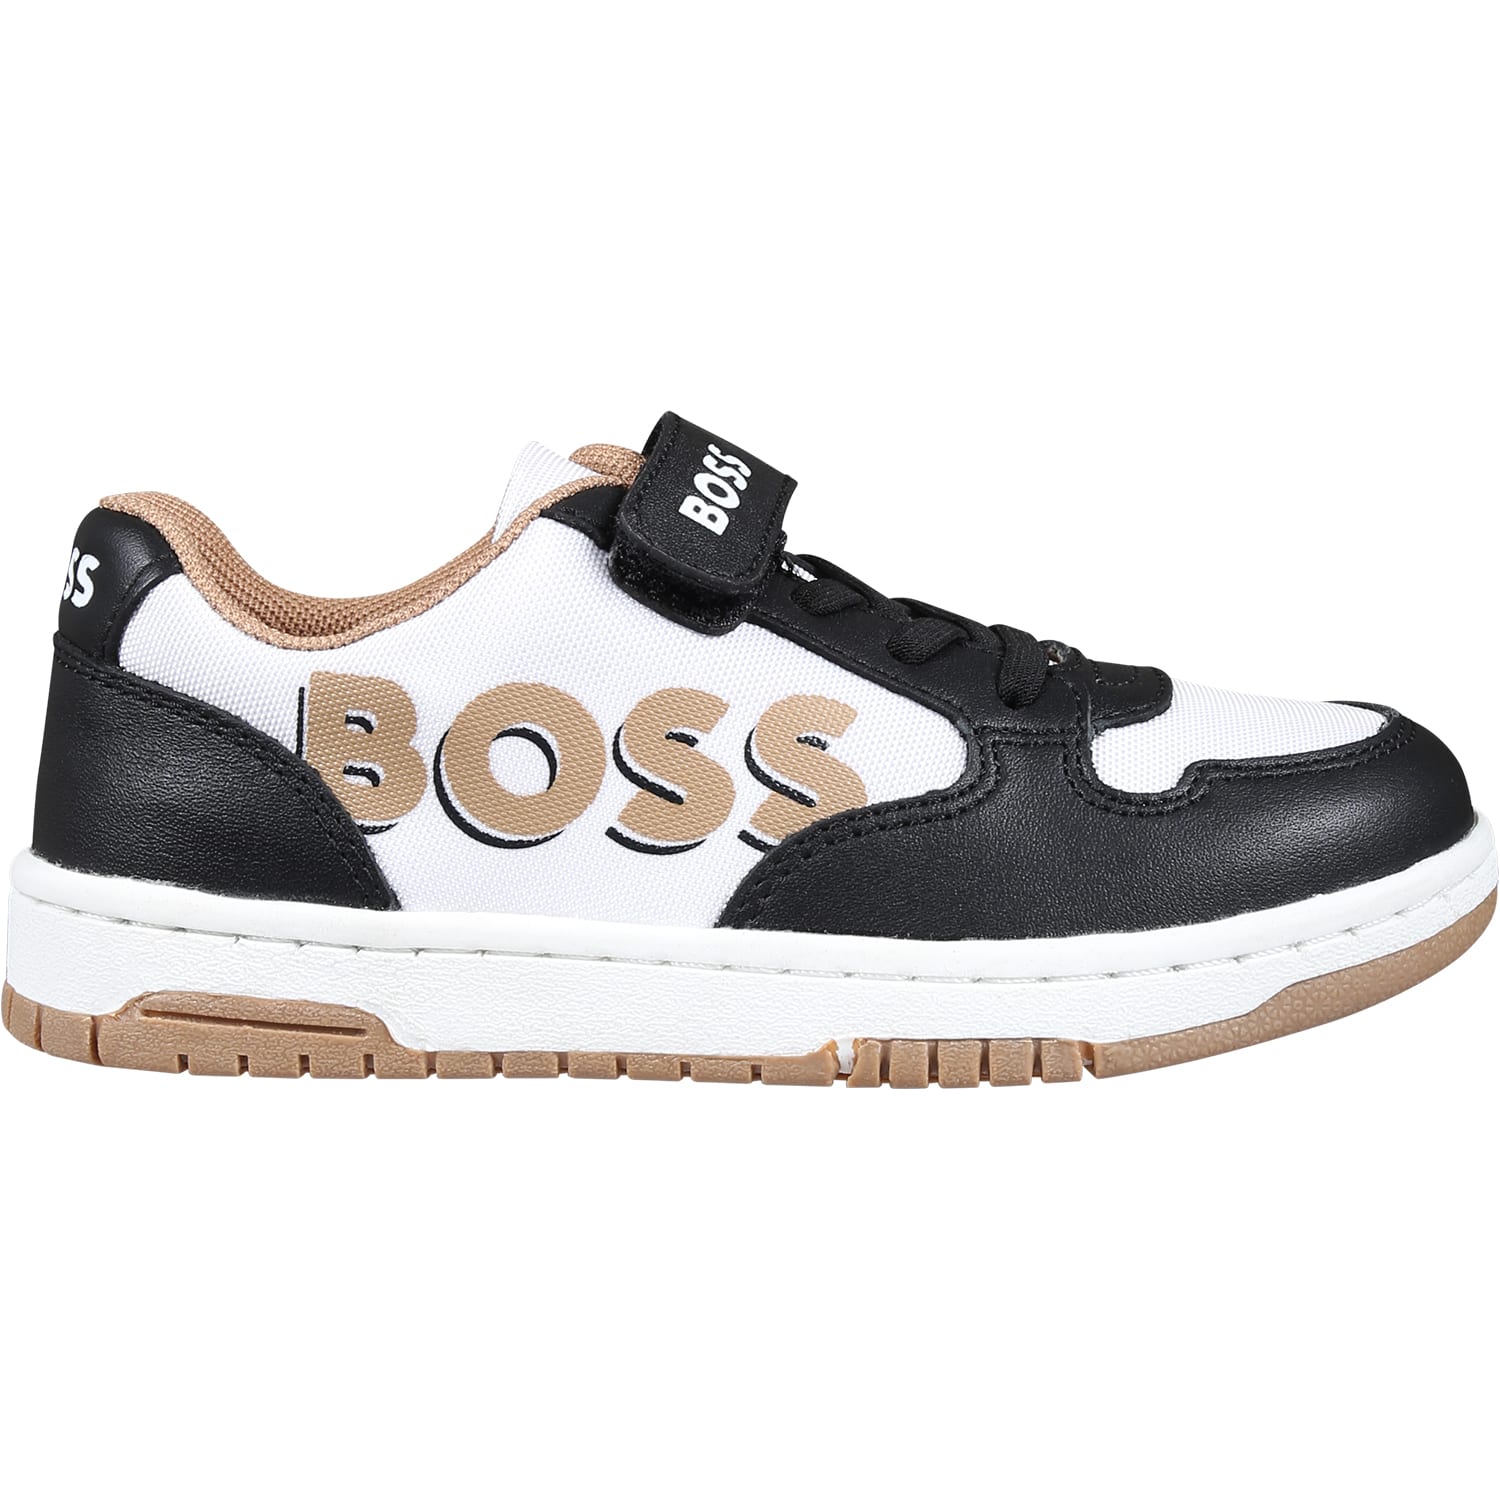 HUGO BOSS BLACK SNEAKERS FOR BOY WITH LOGO